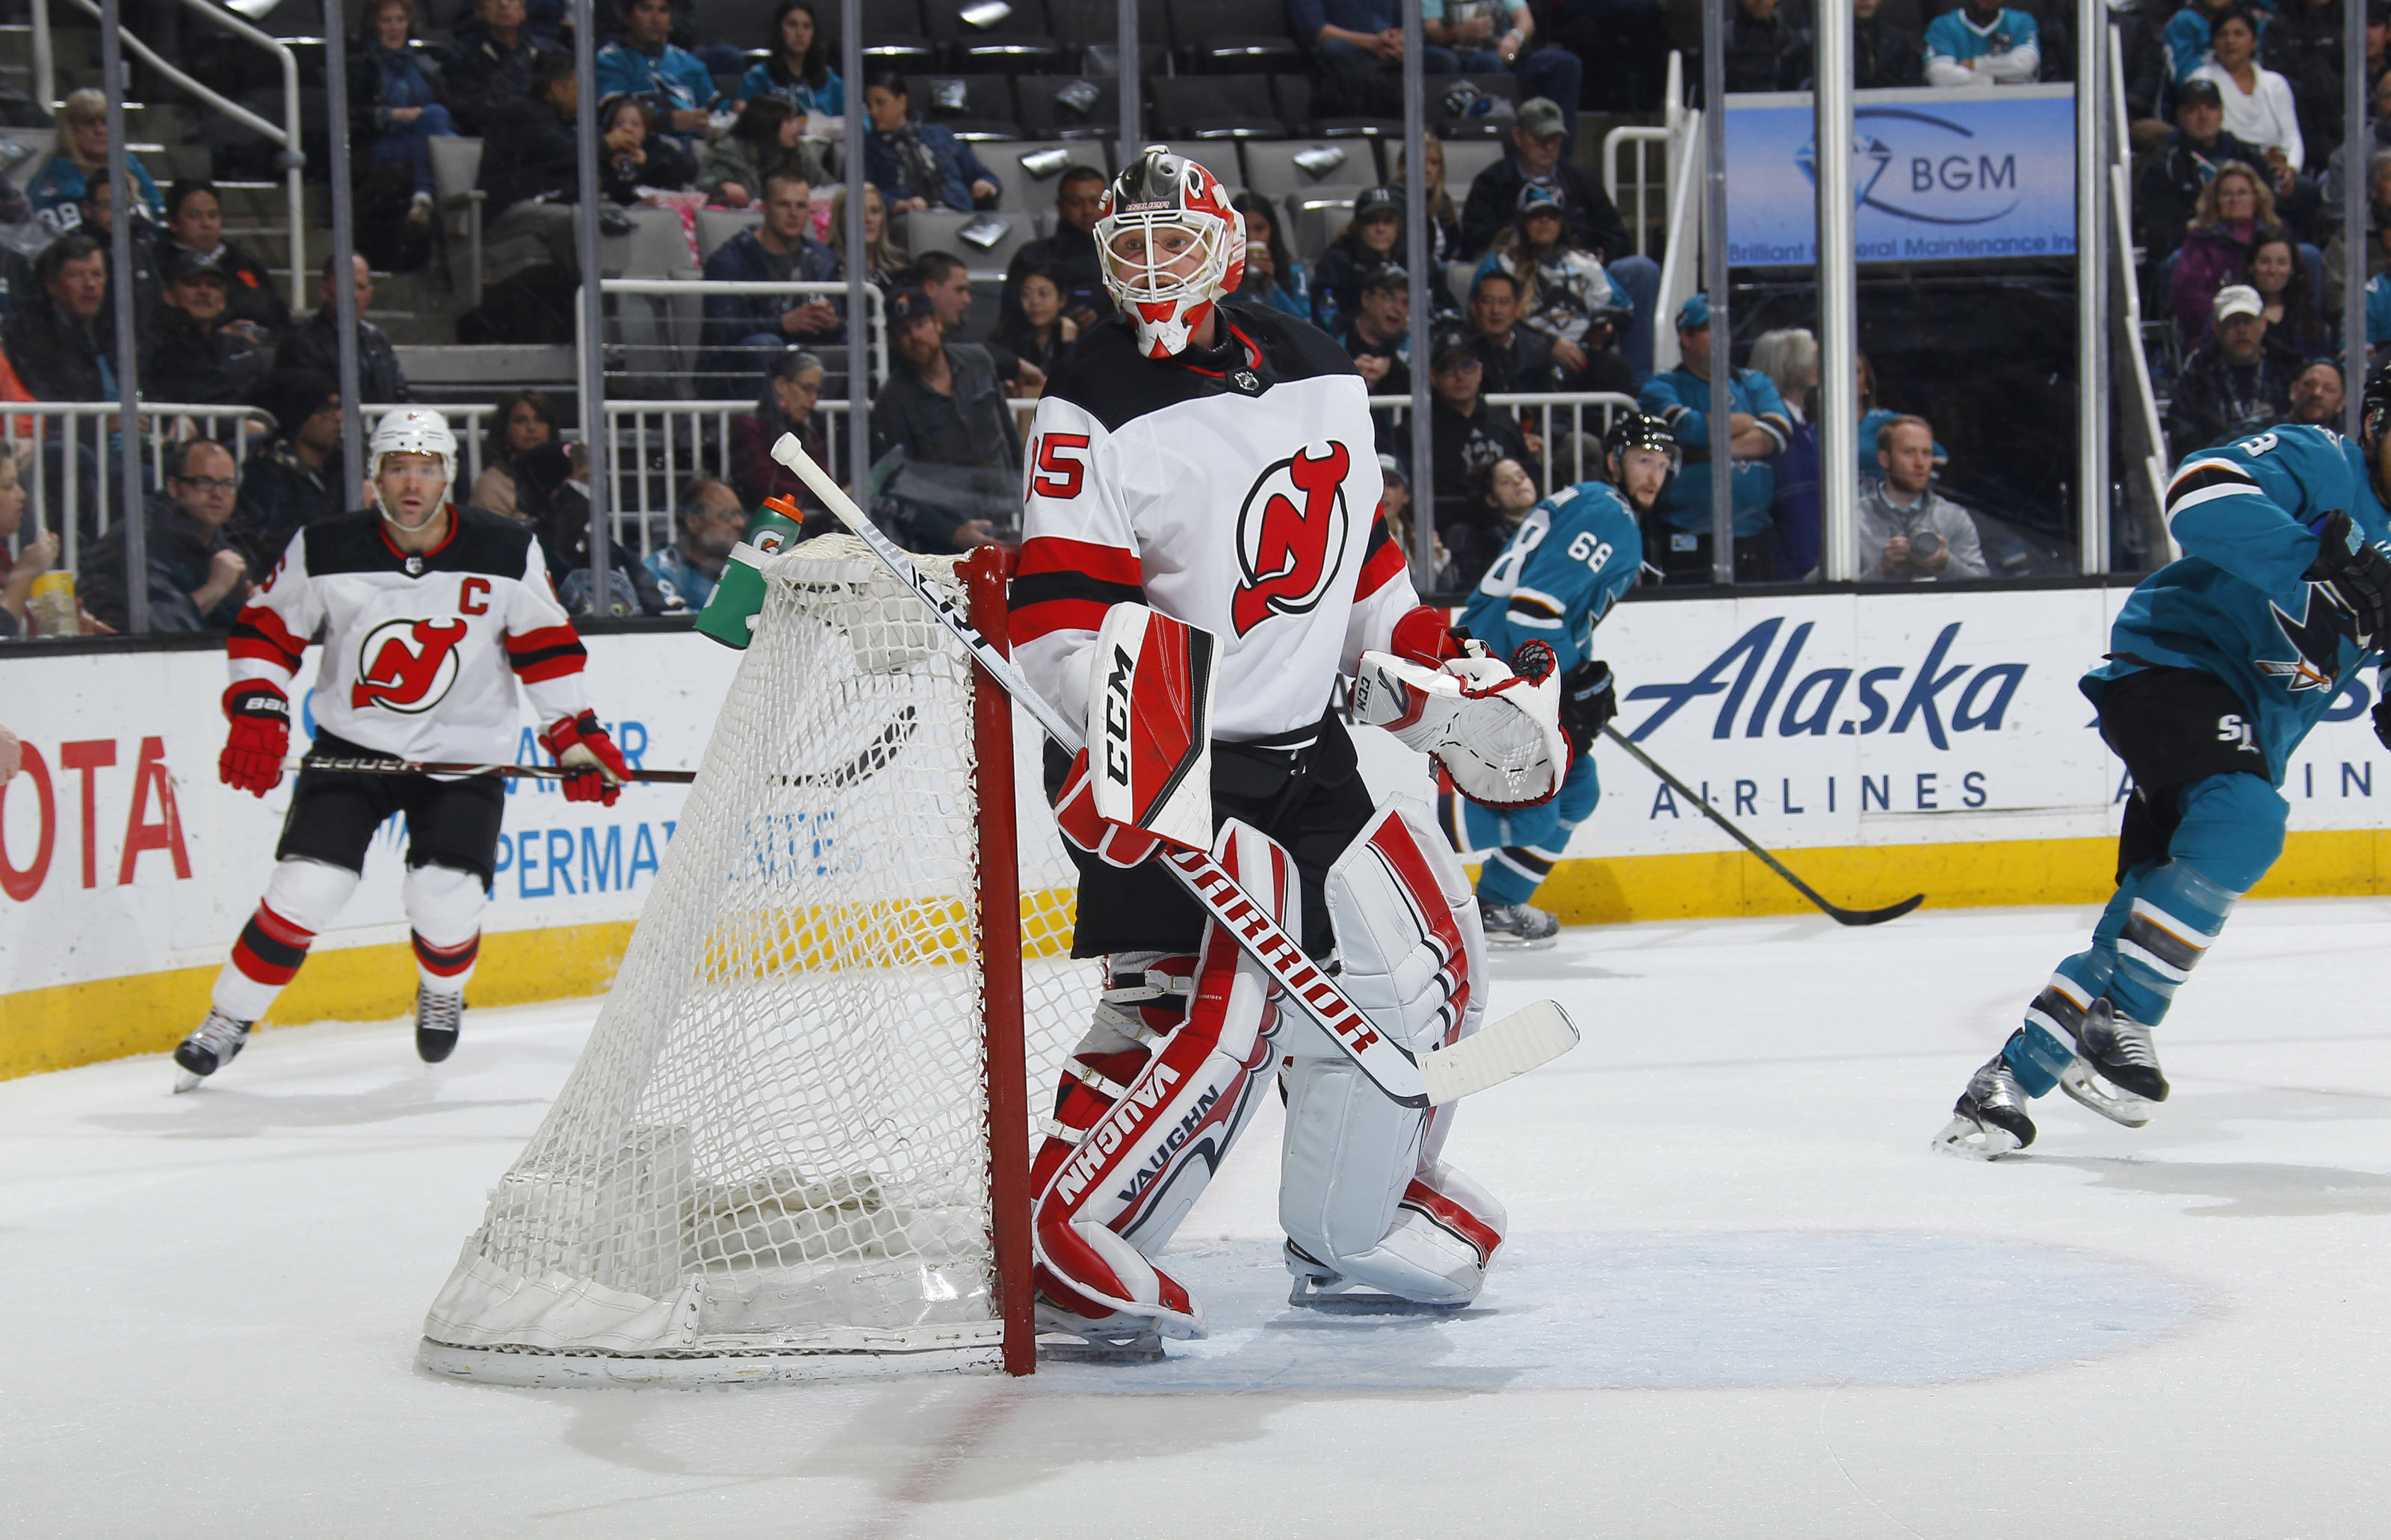 Mackenzie Blackwood Should Not Factor into the Devils Postseason Plans -  All About The Jersey